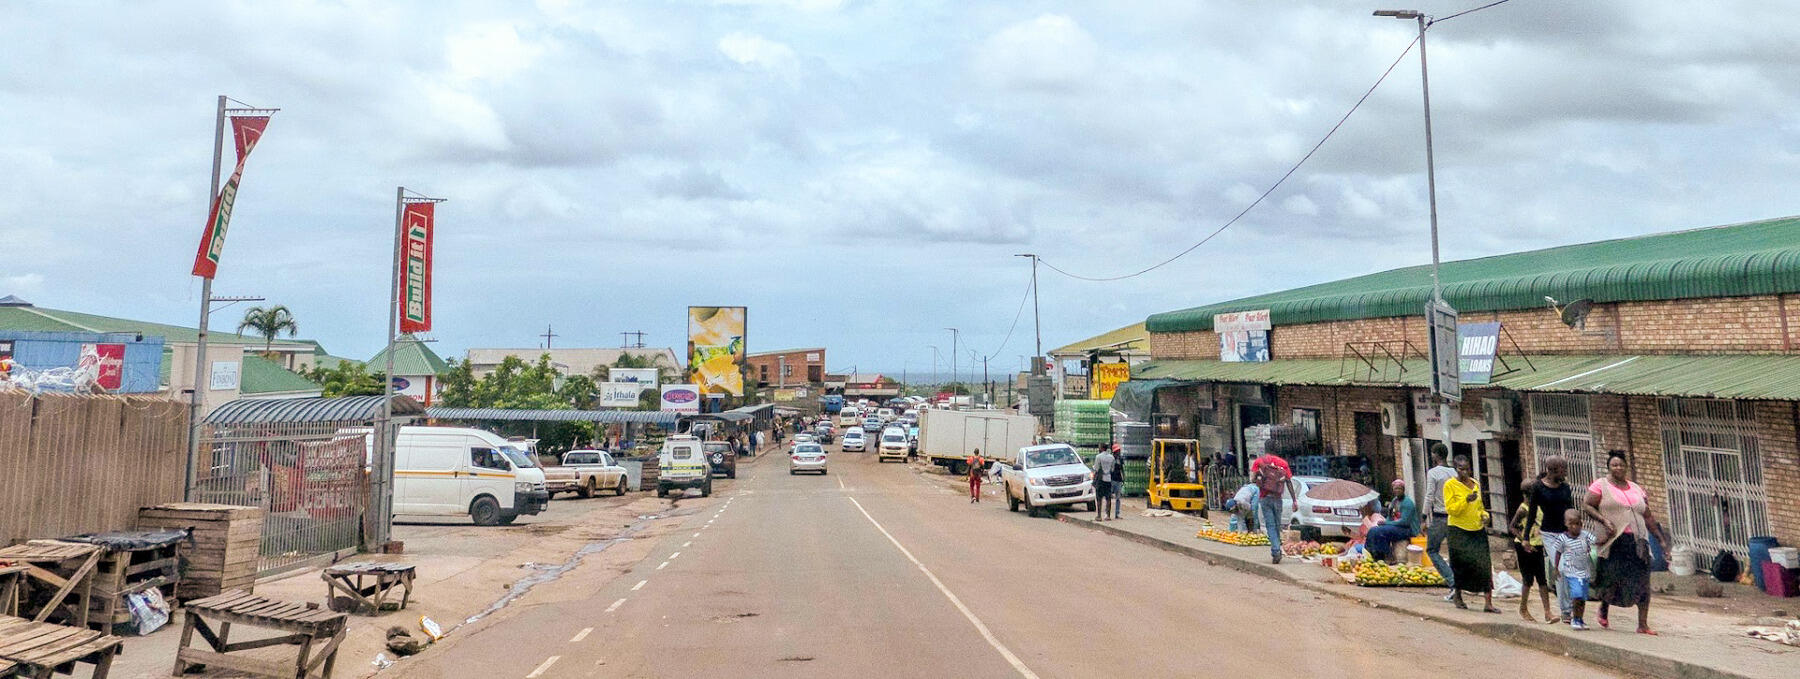 The downtown of Jozini,  a small town in South Africa on the main route to Mozambique.
<br>Photo by James Vonesh.
